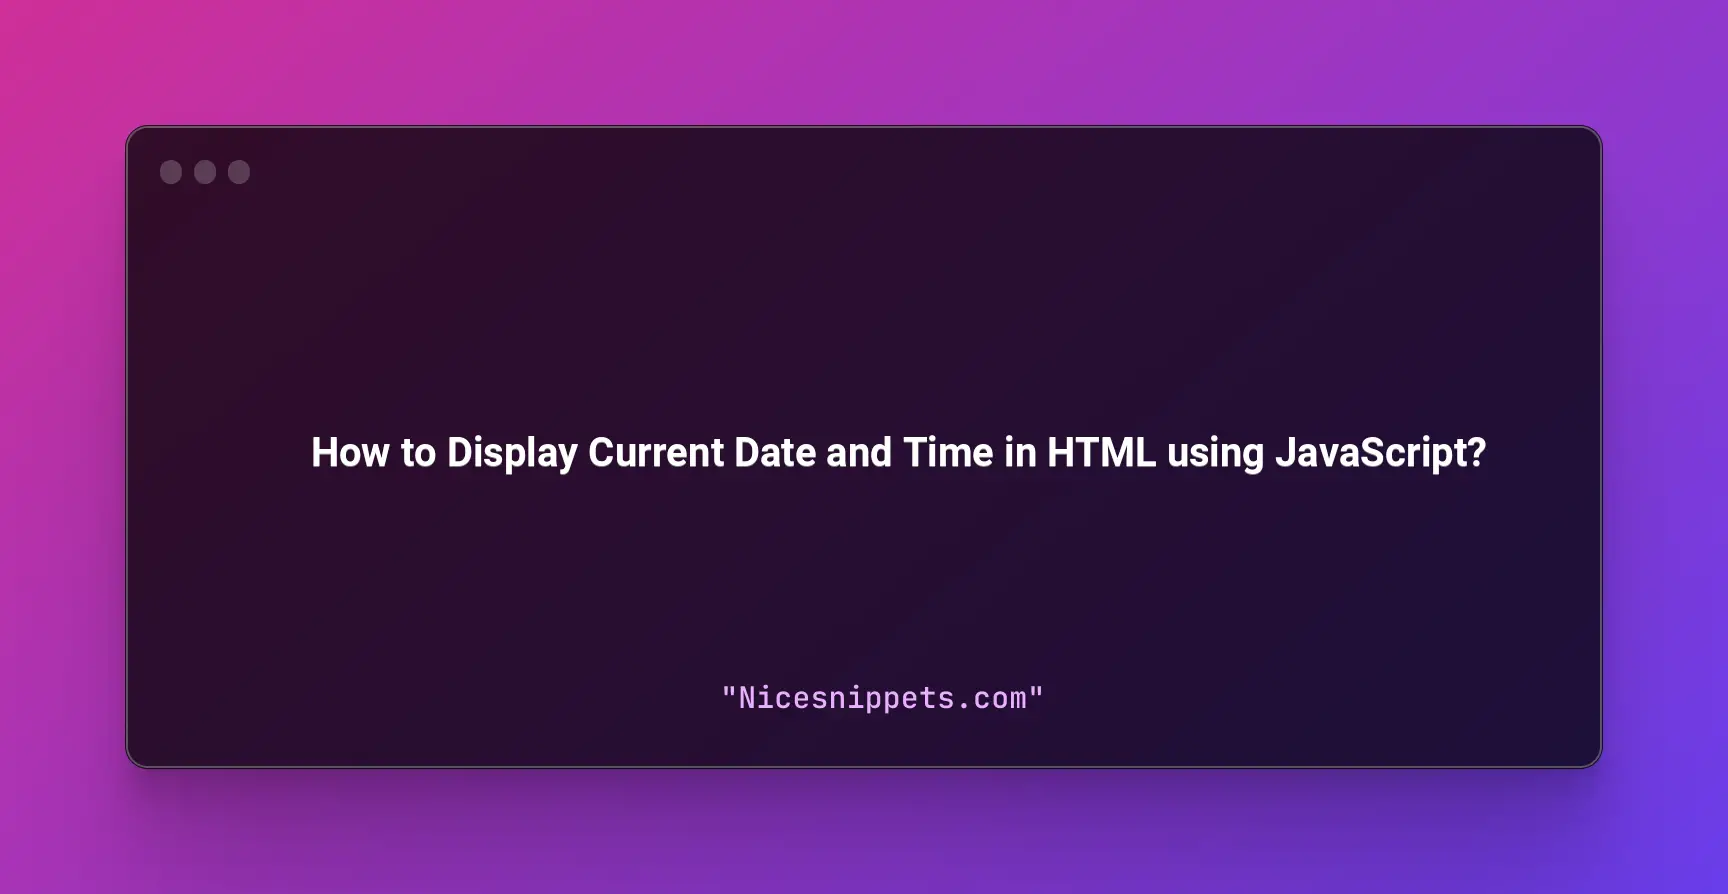 How to Display Current Date and Time in HTML using JavaScript?